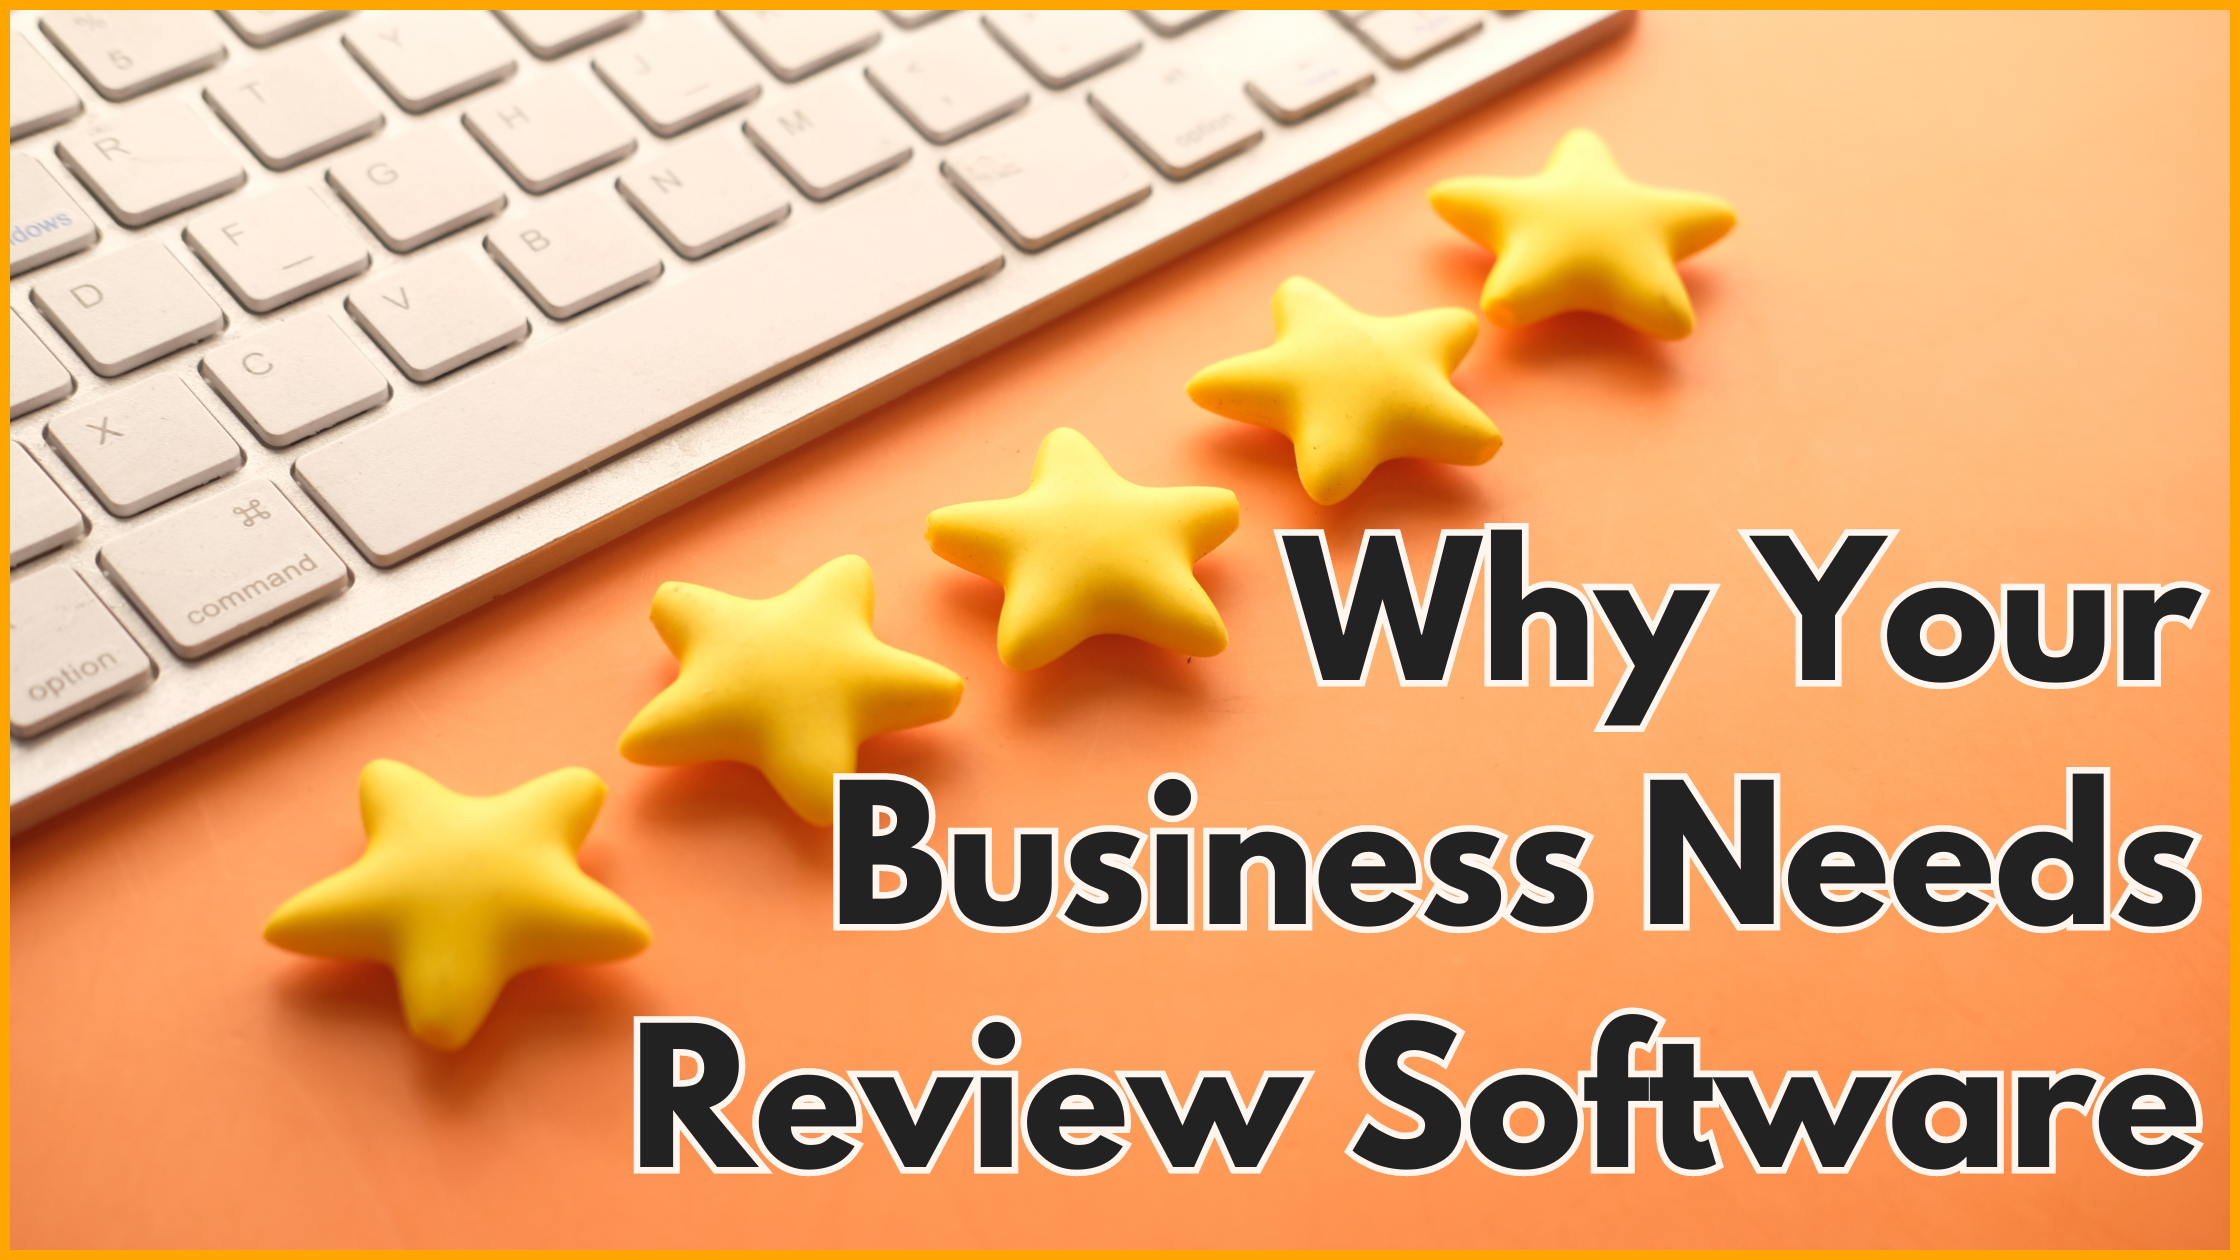 Why Your Business Needs Review Software